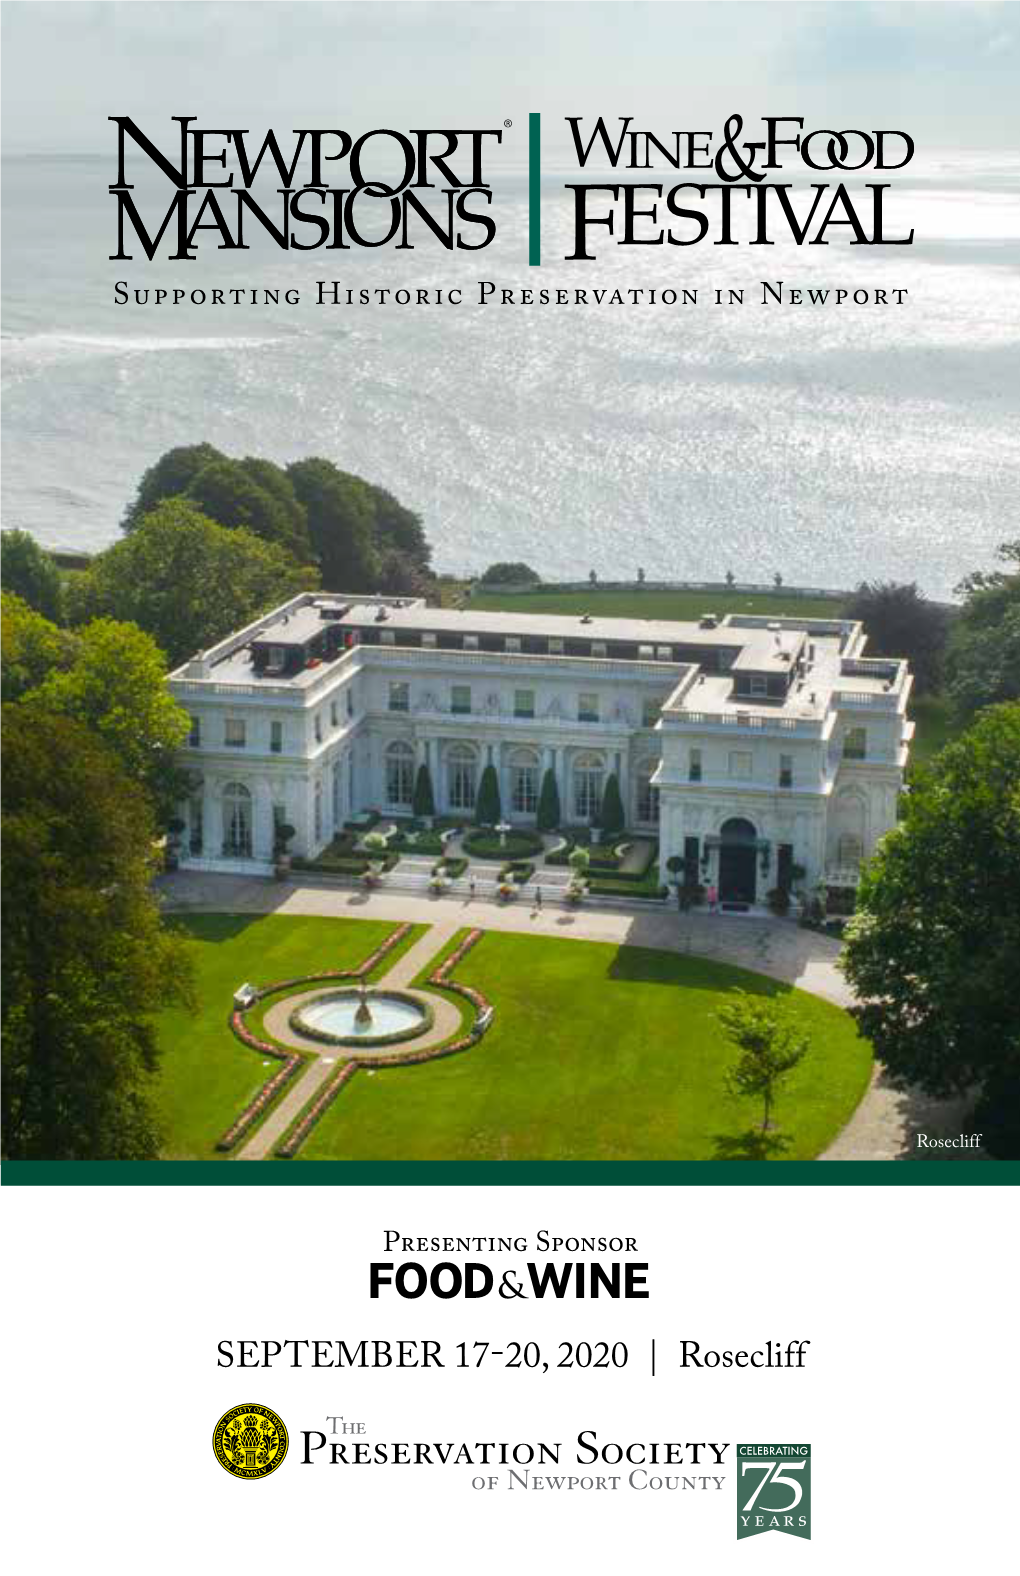 September 17-20, 2020 | Rosecliff 2 Newport Mansions Wine & Food Festival • Newportmansions.Org Welcome